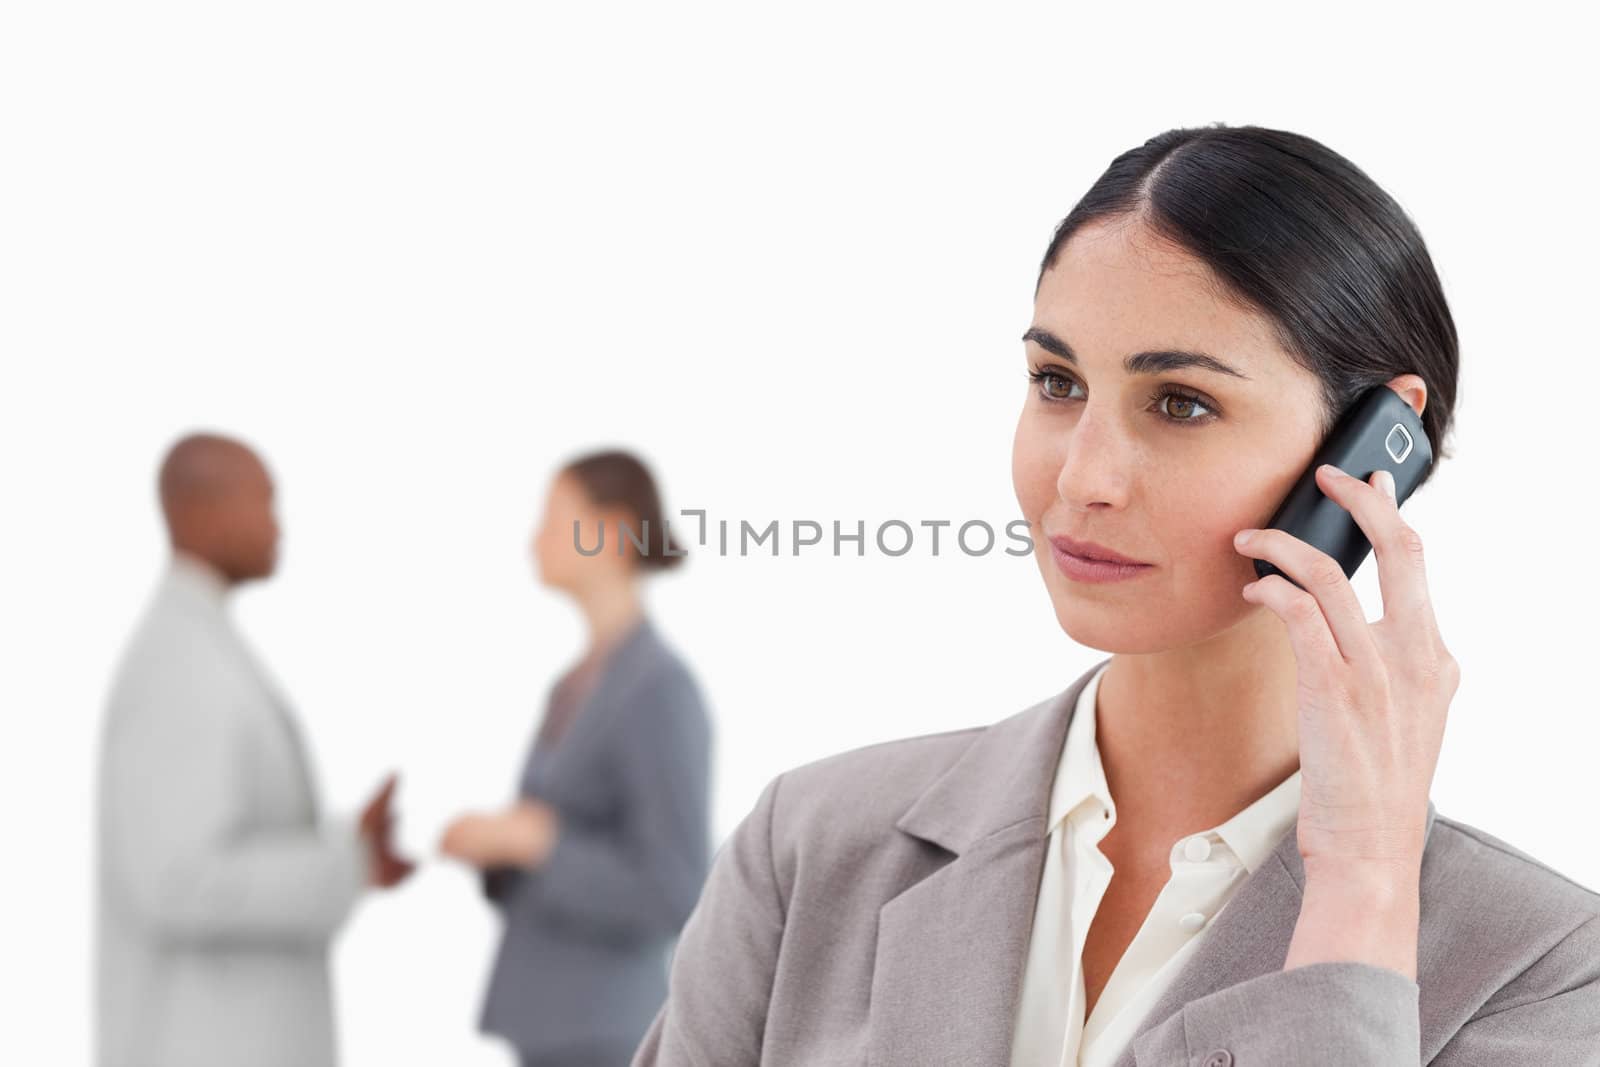 Saleswoman with cellphone and colleagues behind her against a white background